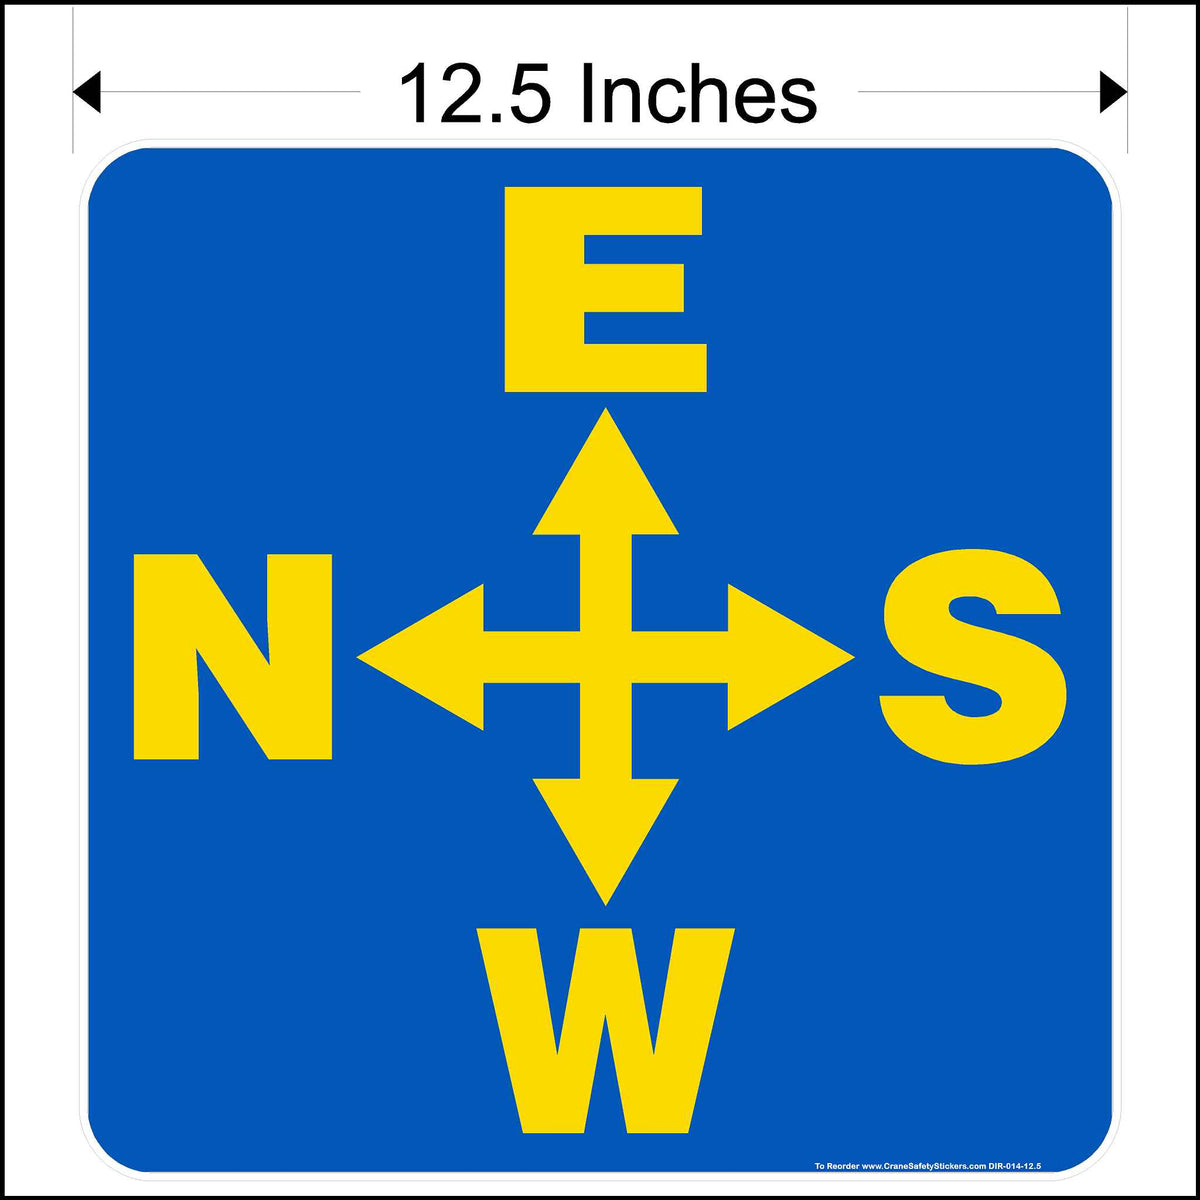 12.5 Inch overhead crane directional decal. Printed with yellow East, South, West, and North Arrows on a blue background.